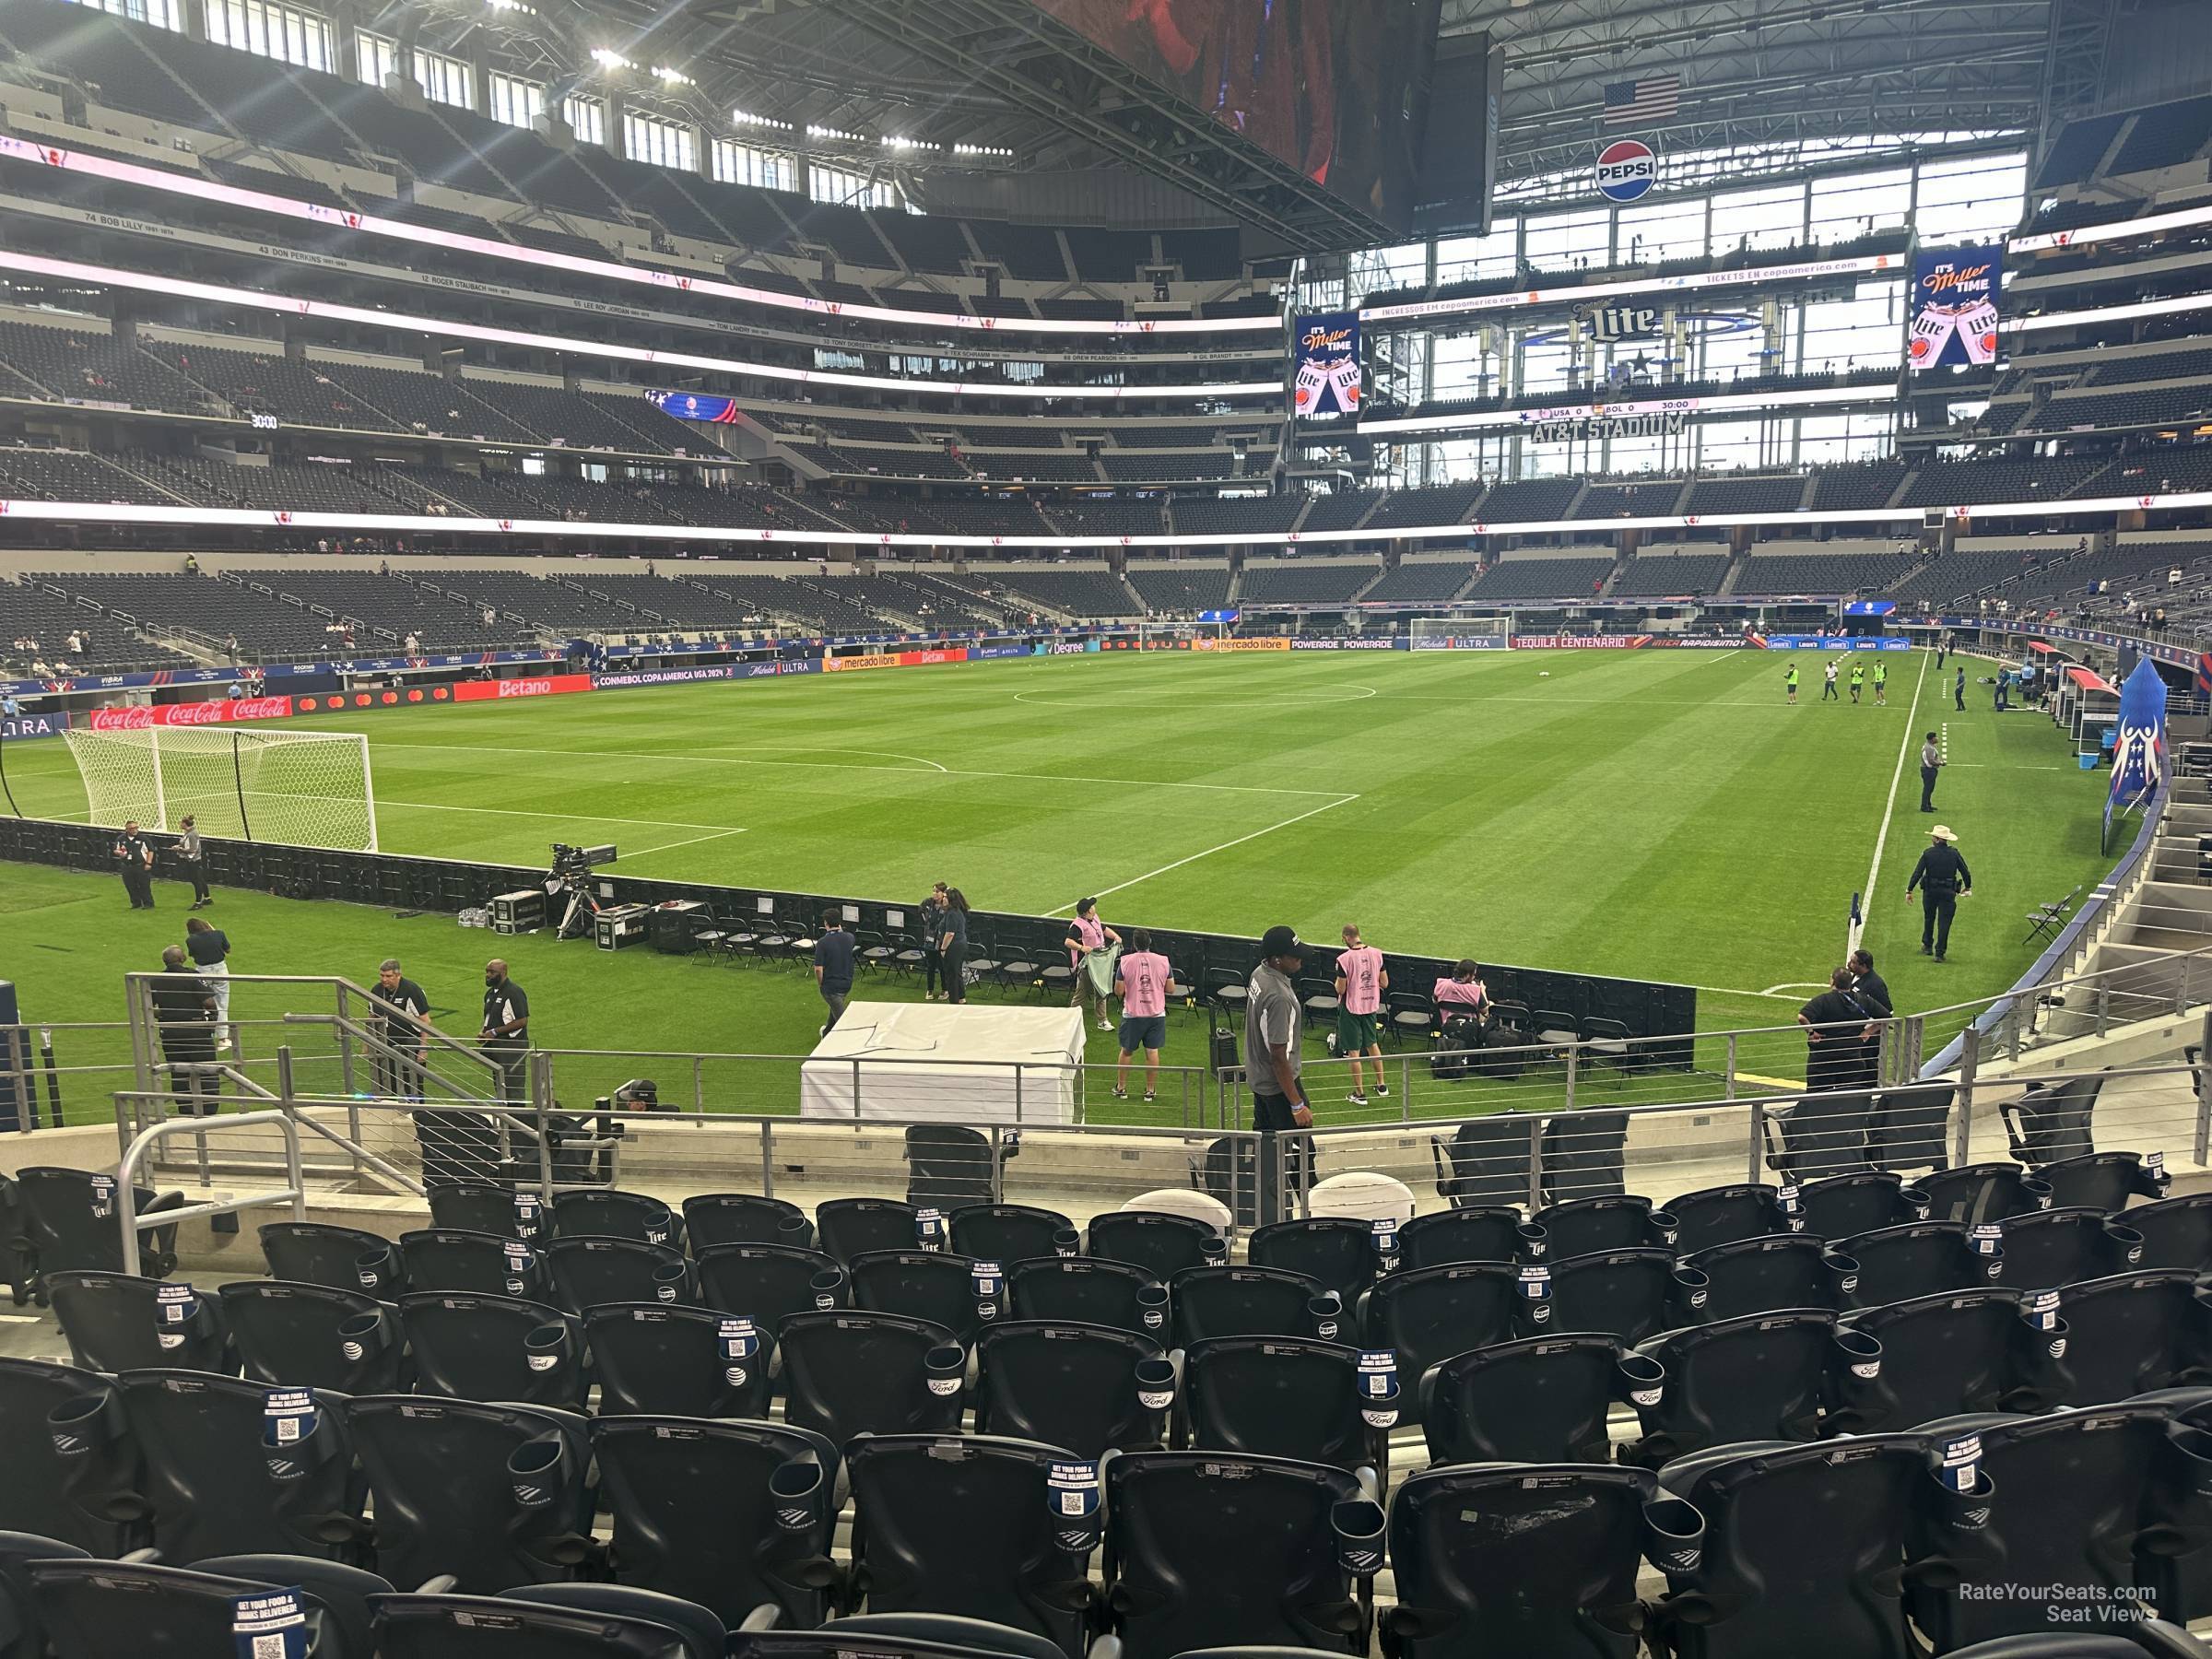 section 145, row 11 seat view  for soccer - at&t stadium (cowboys stadium)